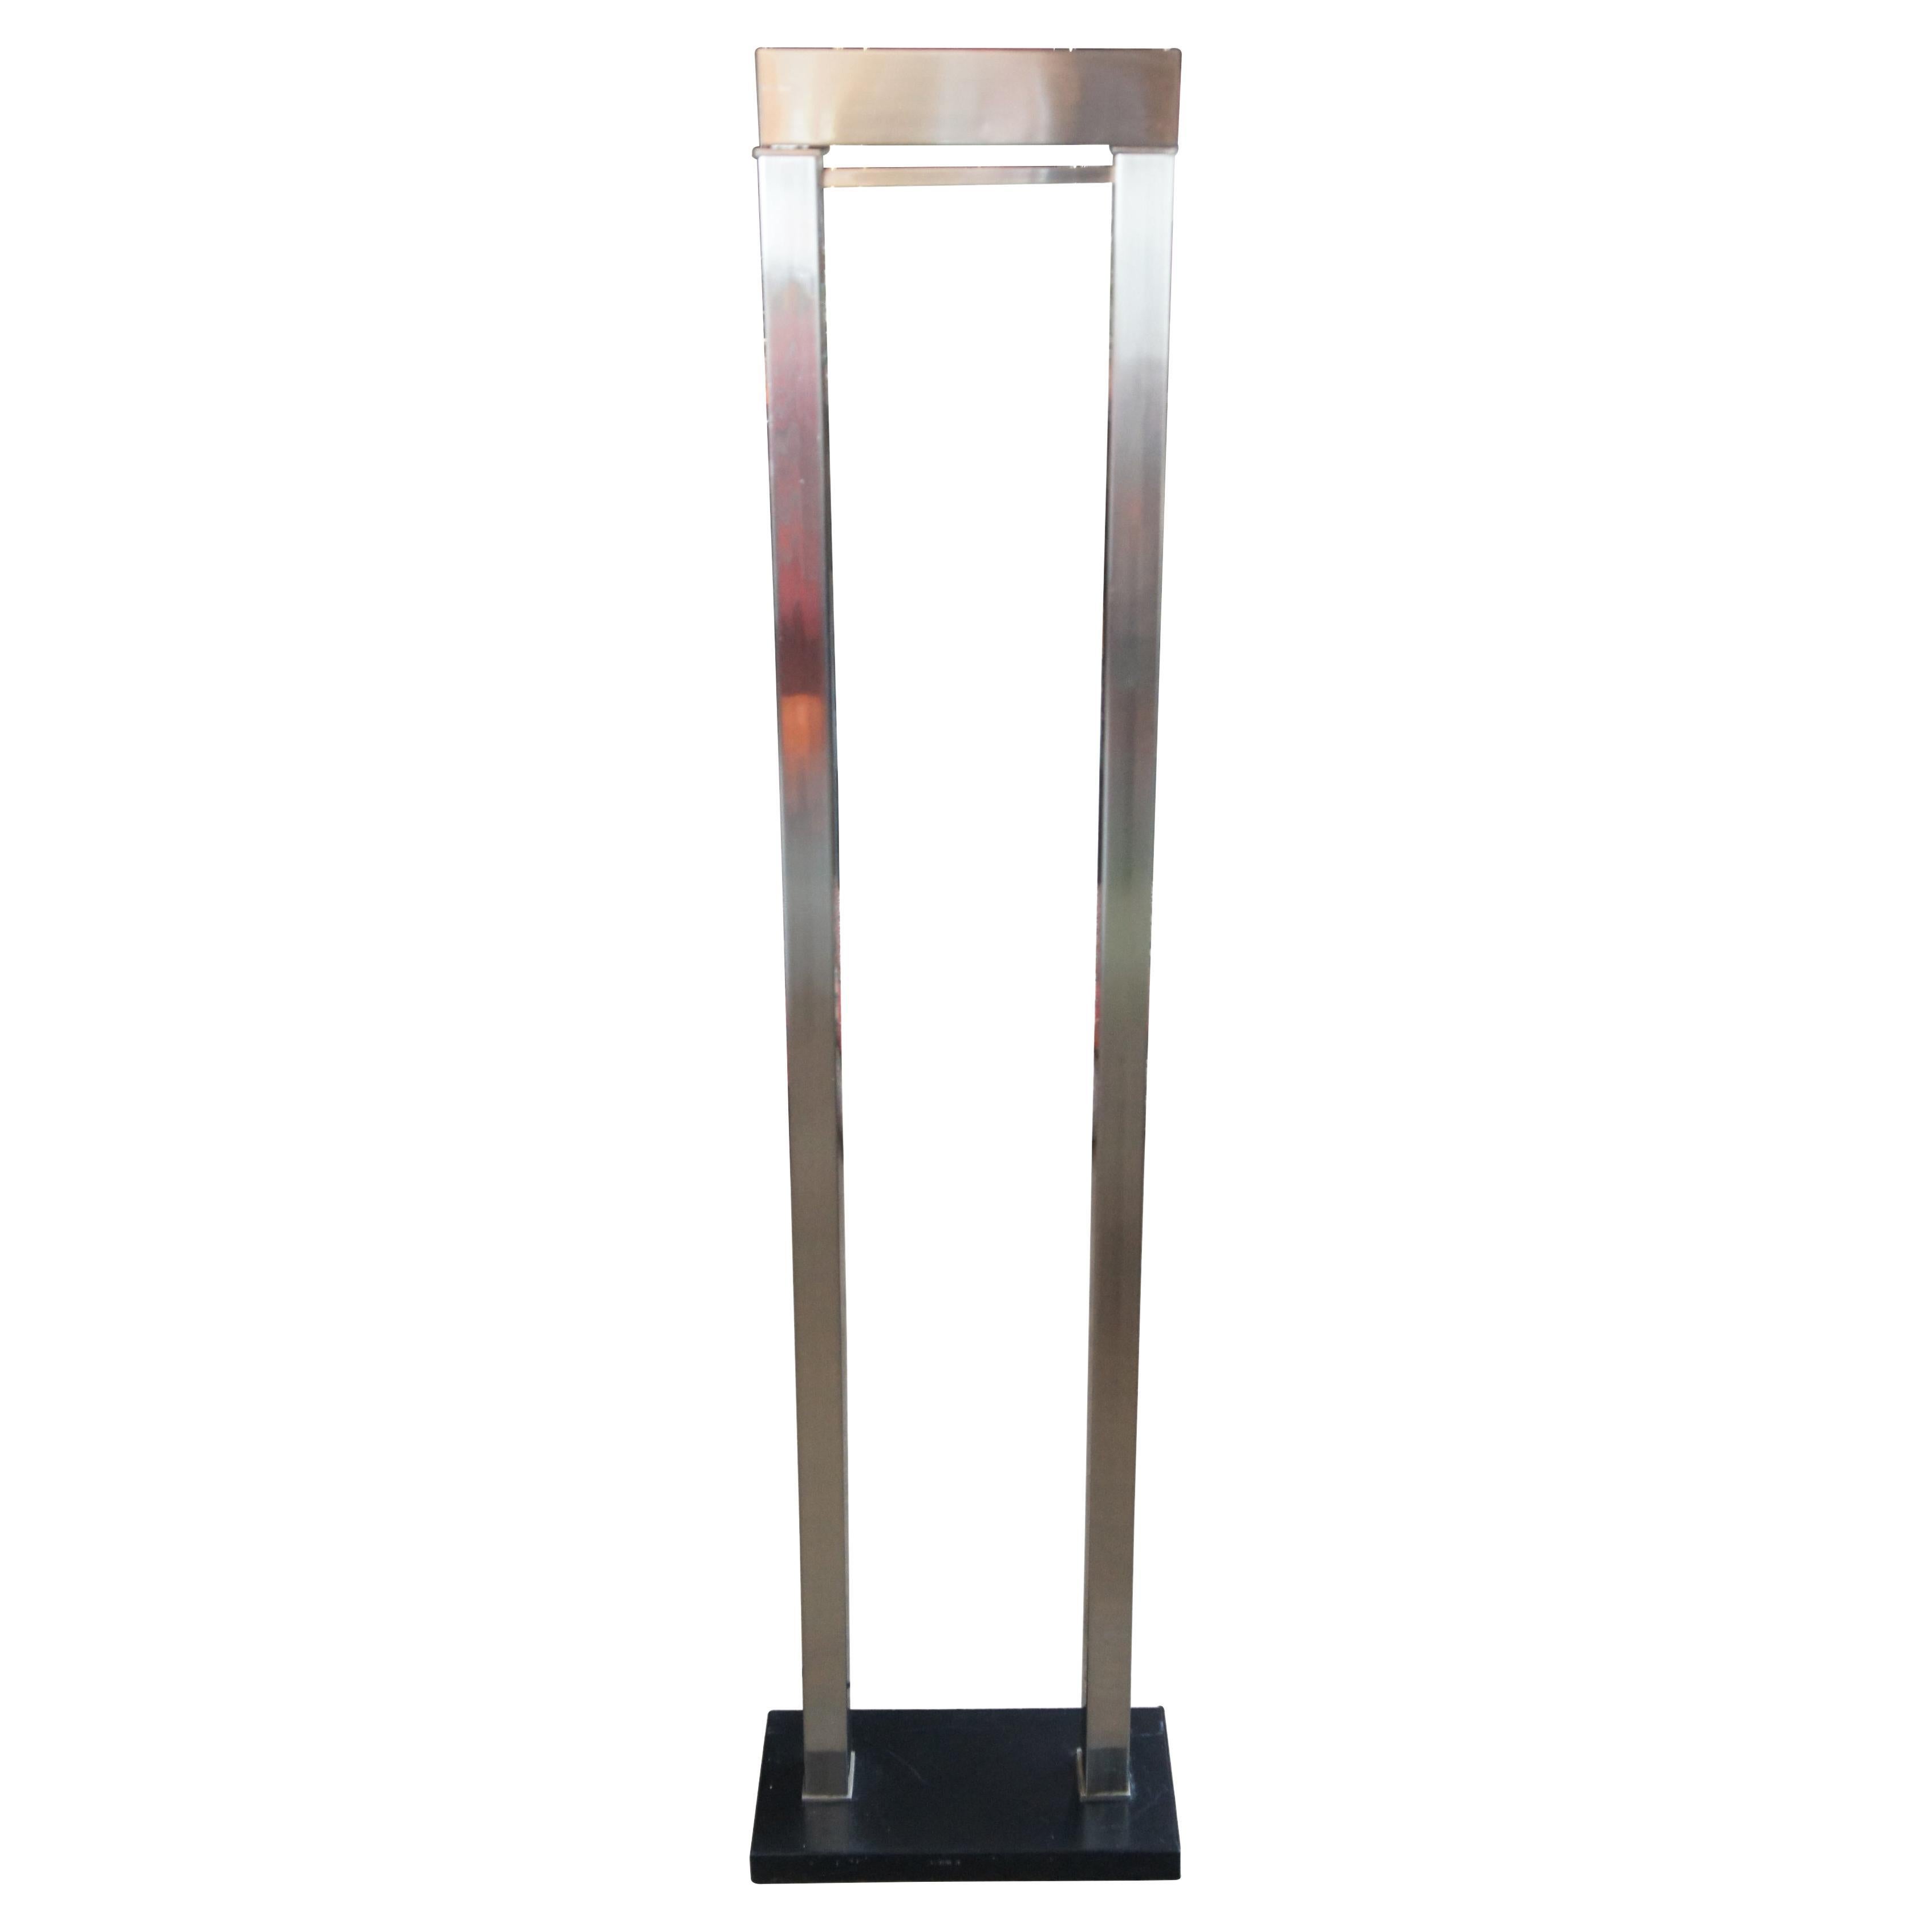 Natural Light Company Contemporary Metal Swivel Floor Lamp Dimmable For Sale